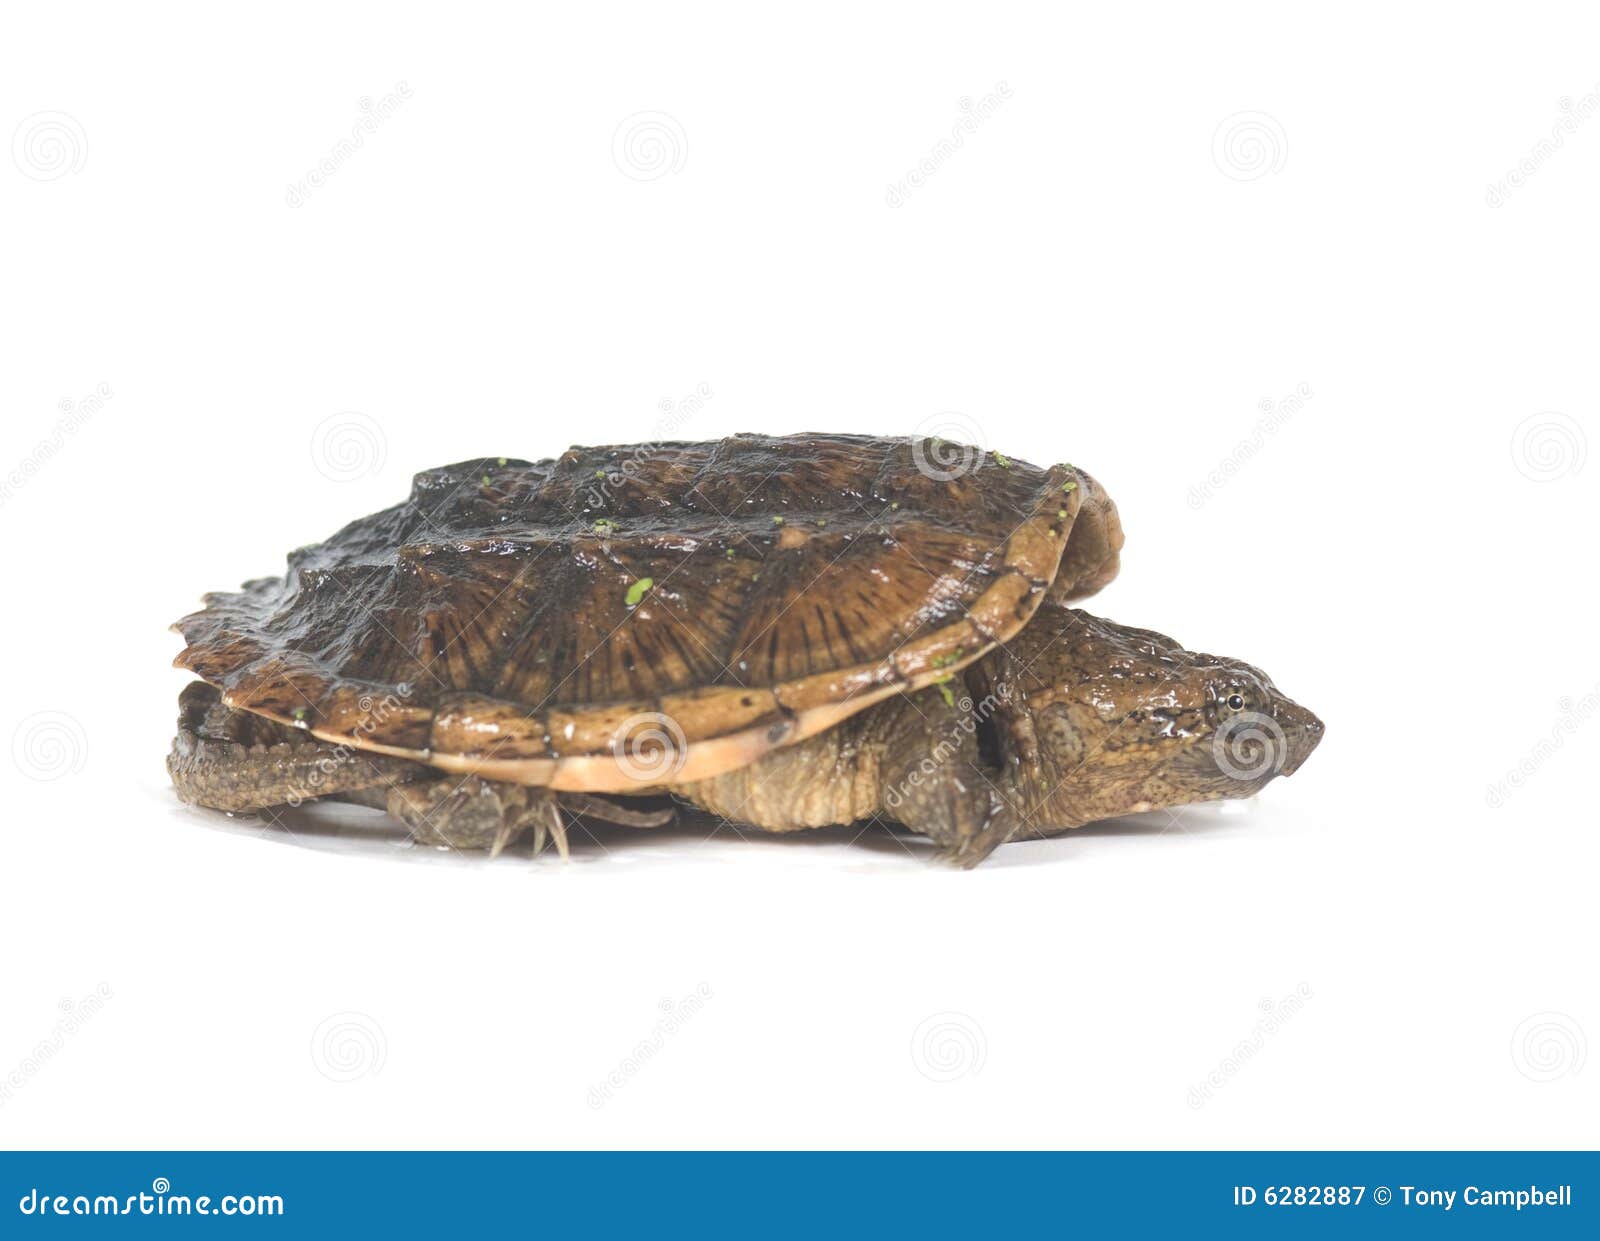 Baby snapping turtle stock image. Image of summer, reptile - 6282887